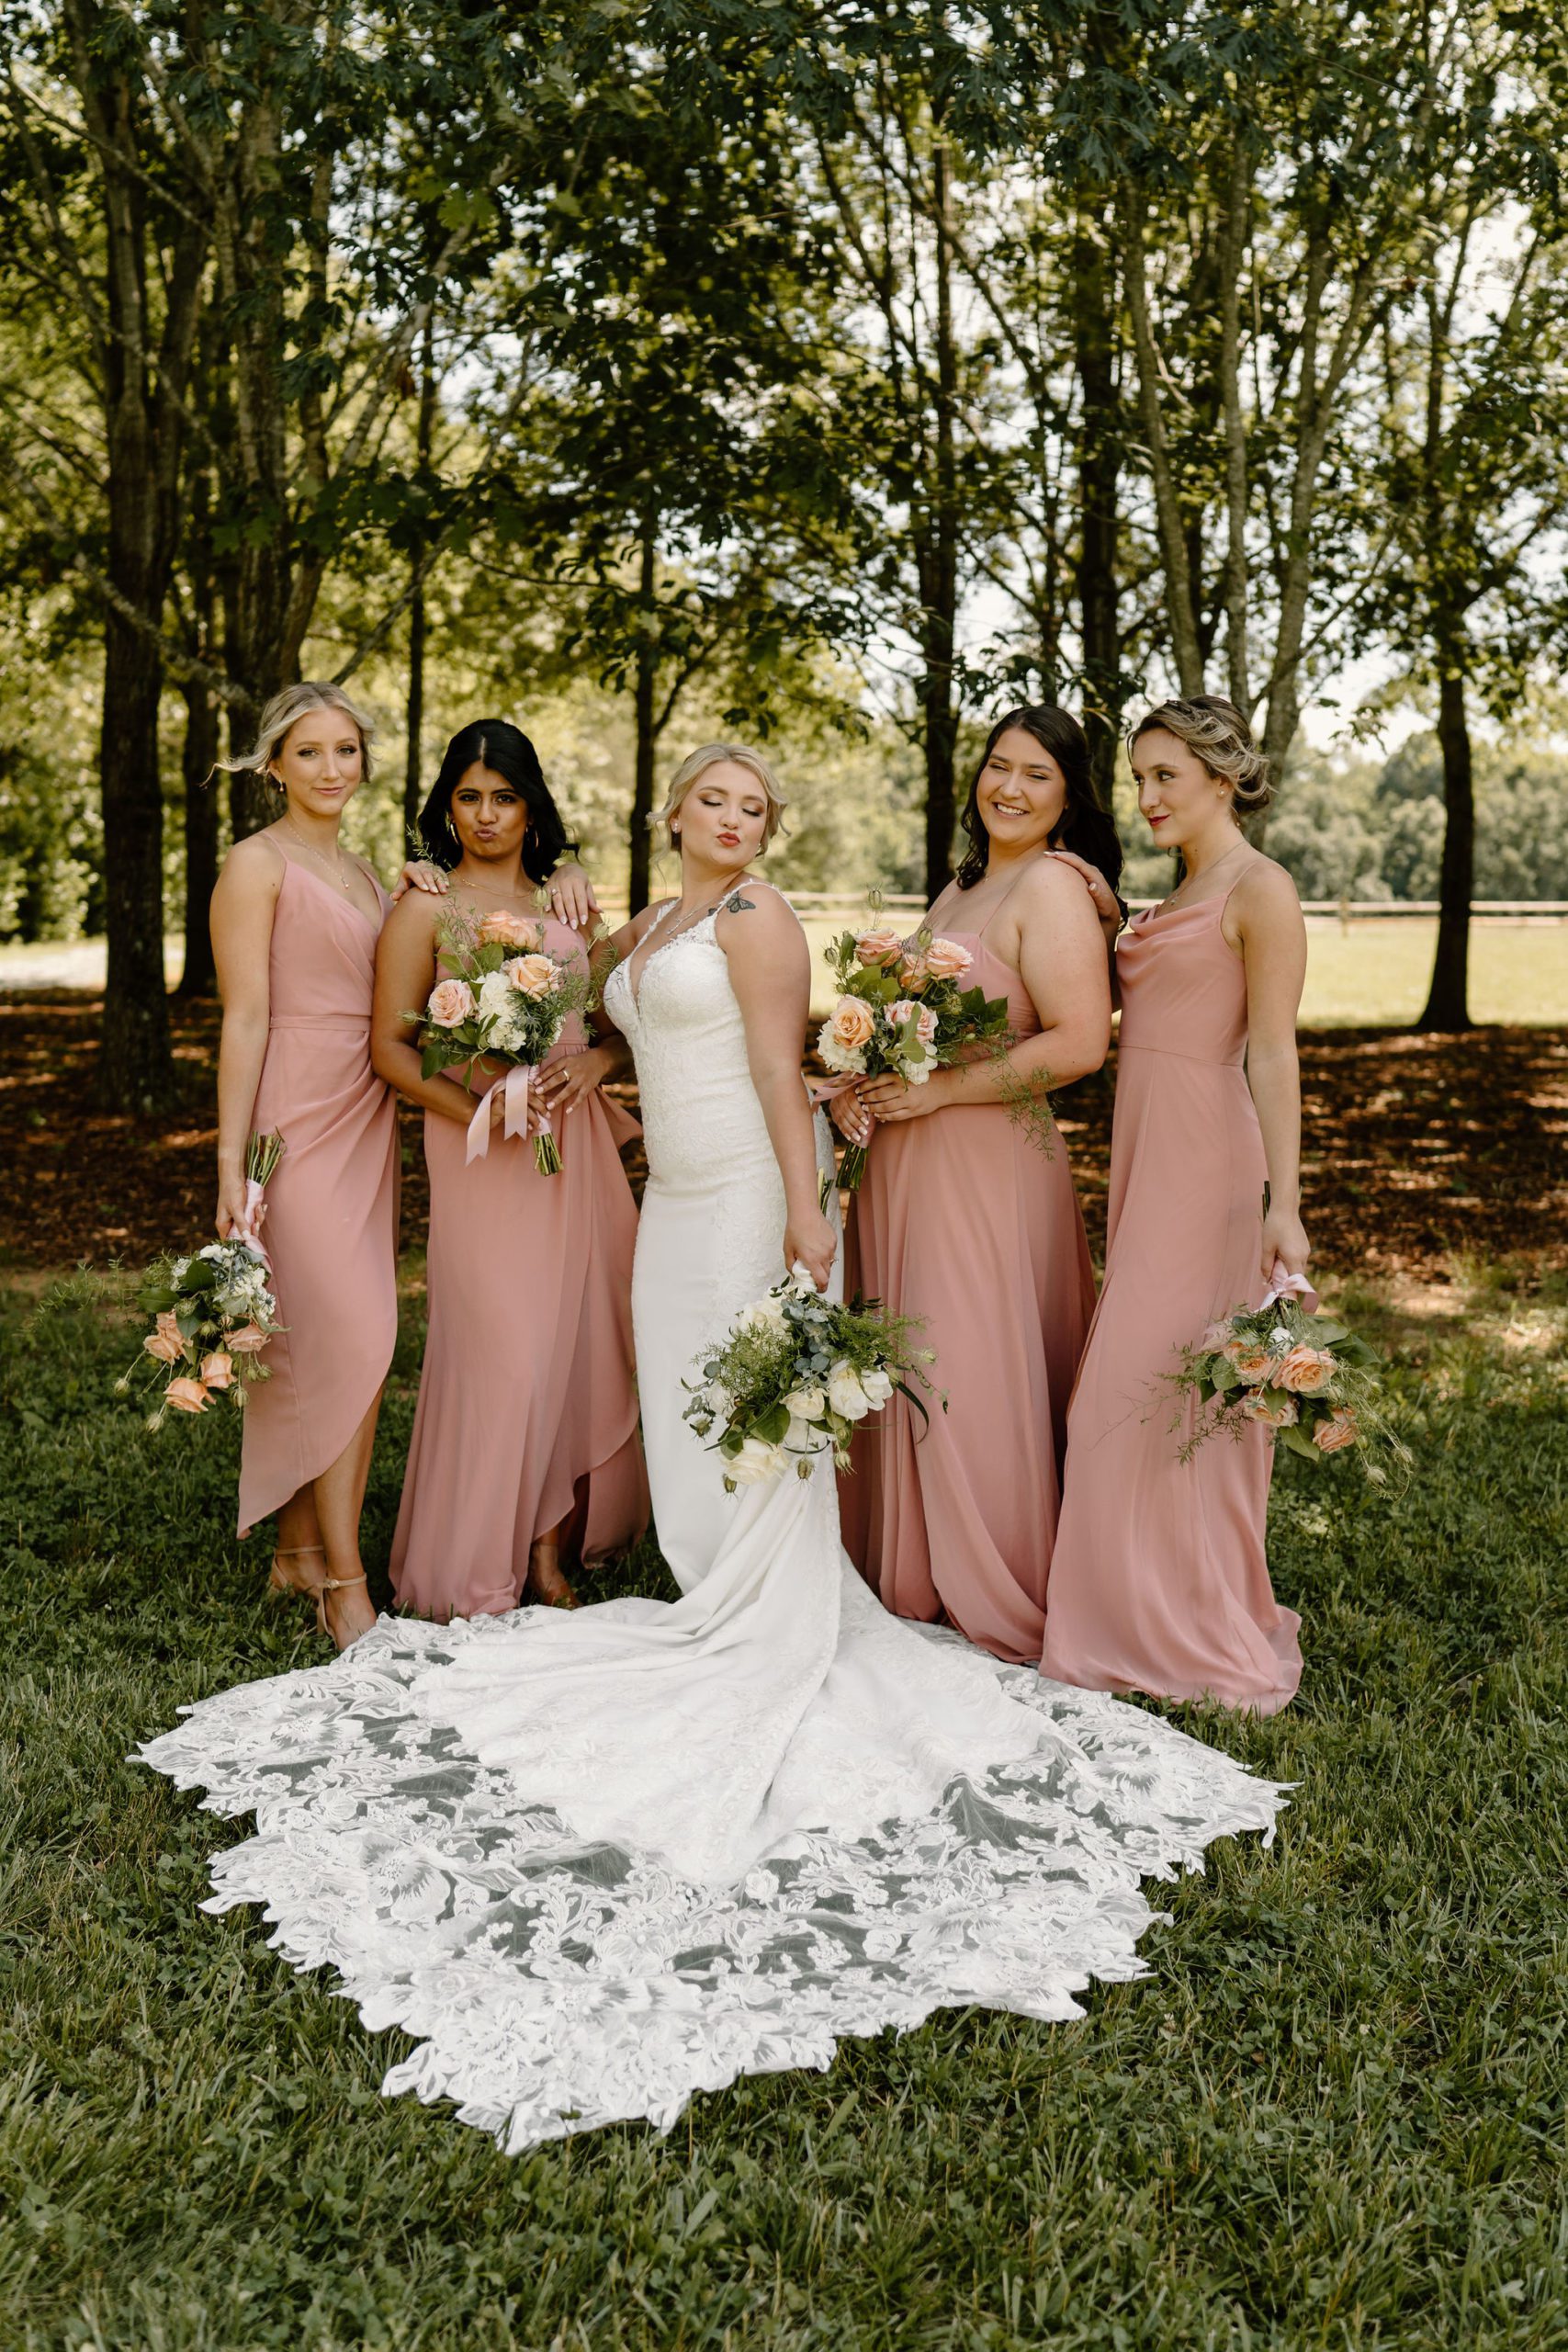 Long Acres Barn venue in Winston-Salem, North Carolina with beautiful decor and forest vibes in bridal party photos